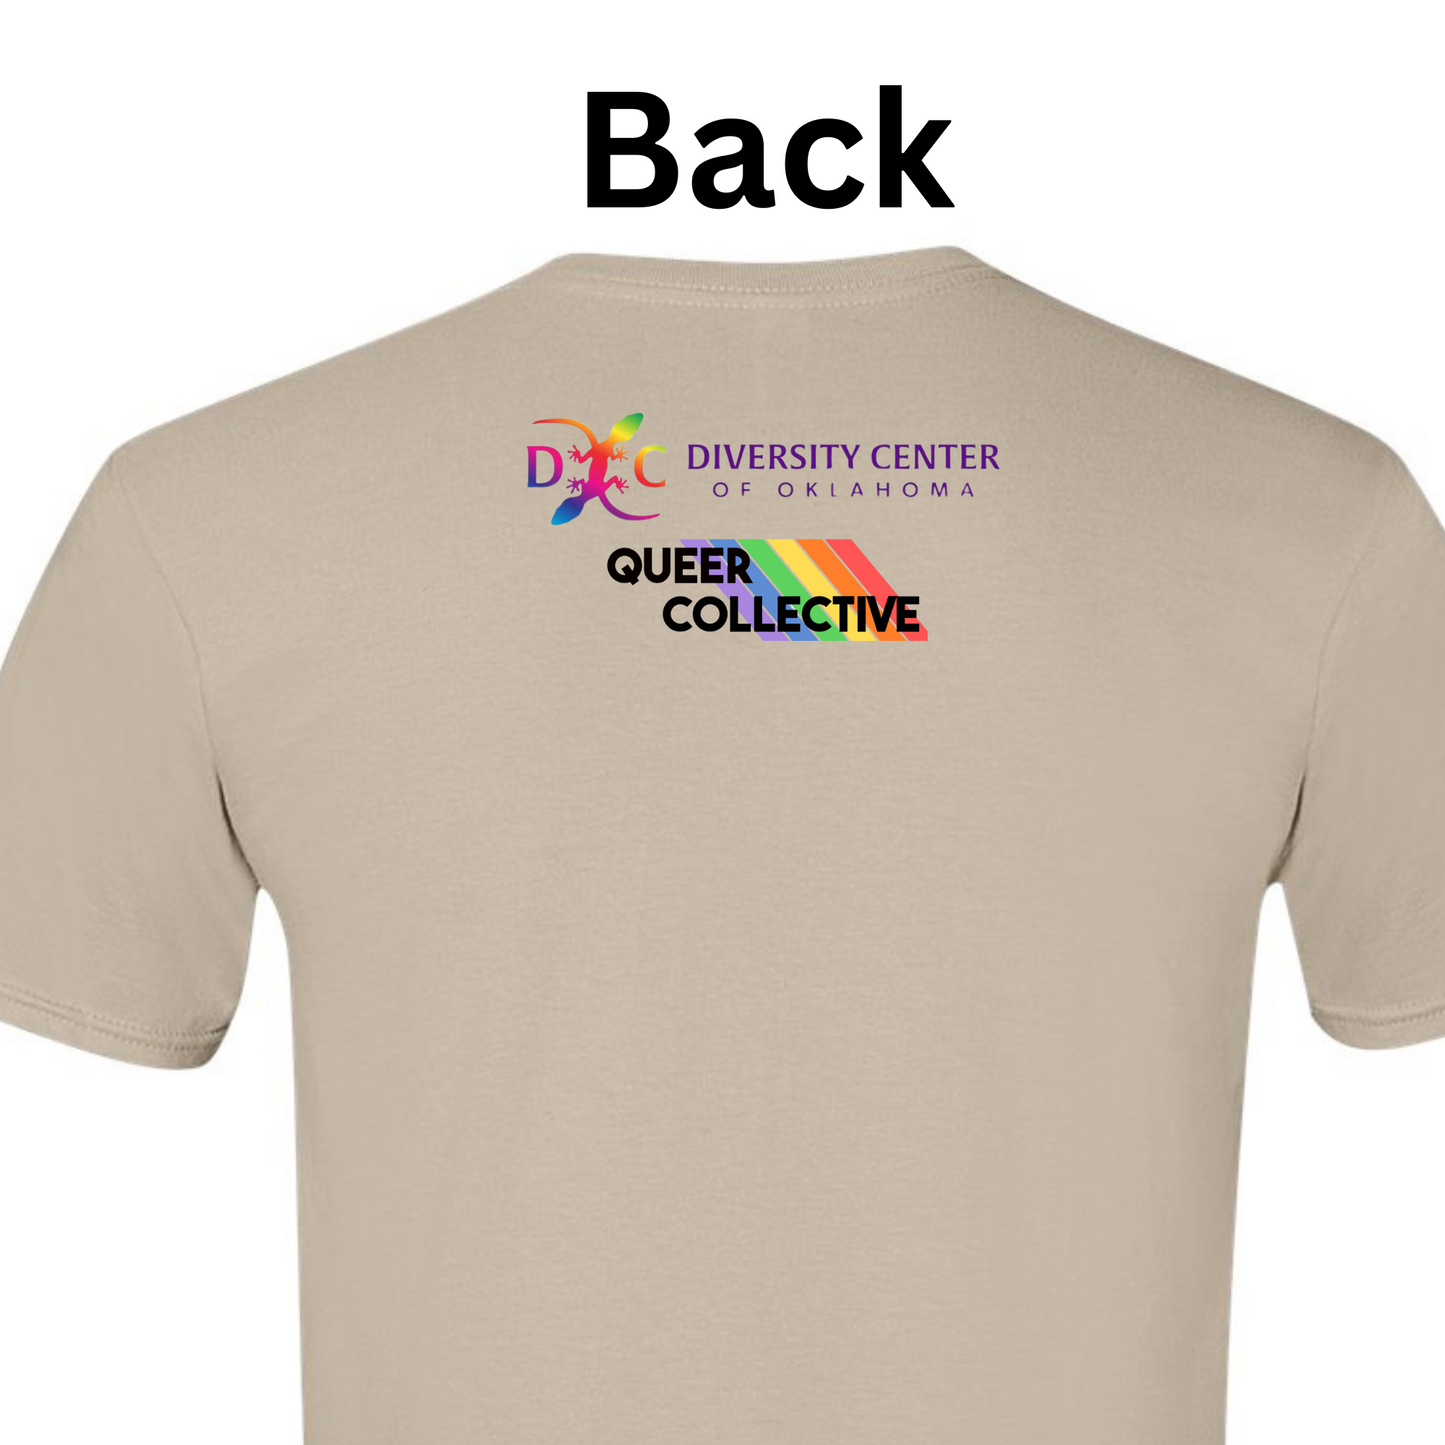 This is a picture of the back of the shirt. On the upper back is the logo for the Diversity Center of Oklahoma with Queer Collective's logo below. The shirt is Sand colored.